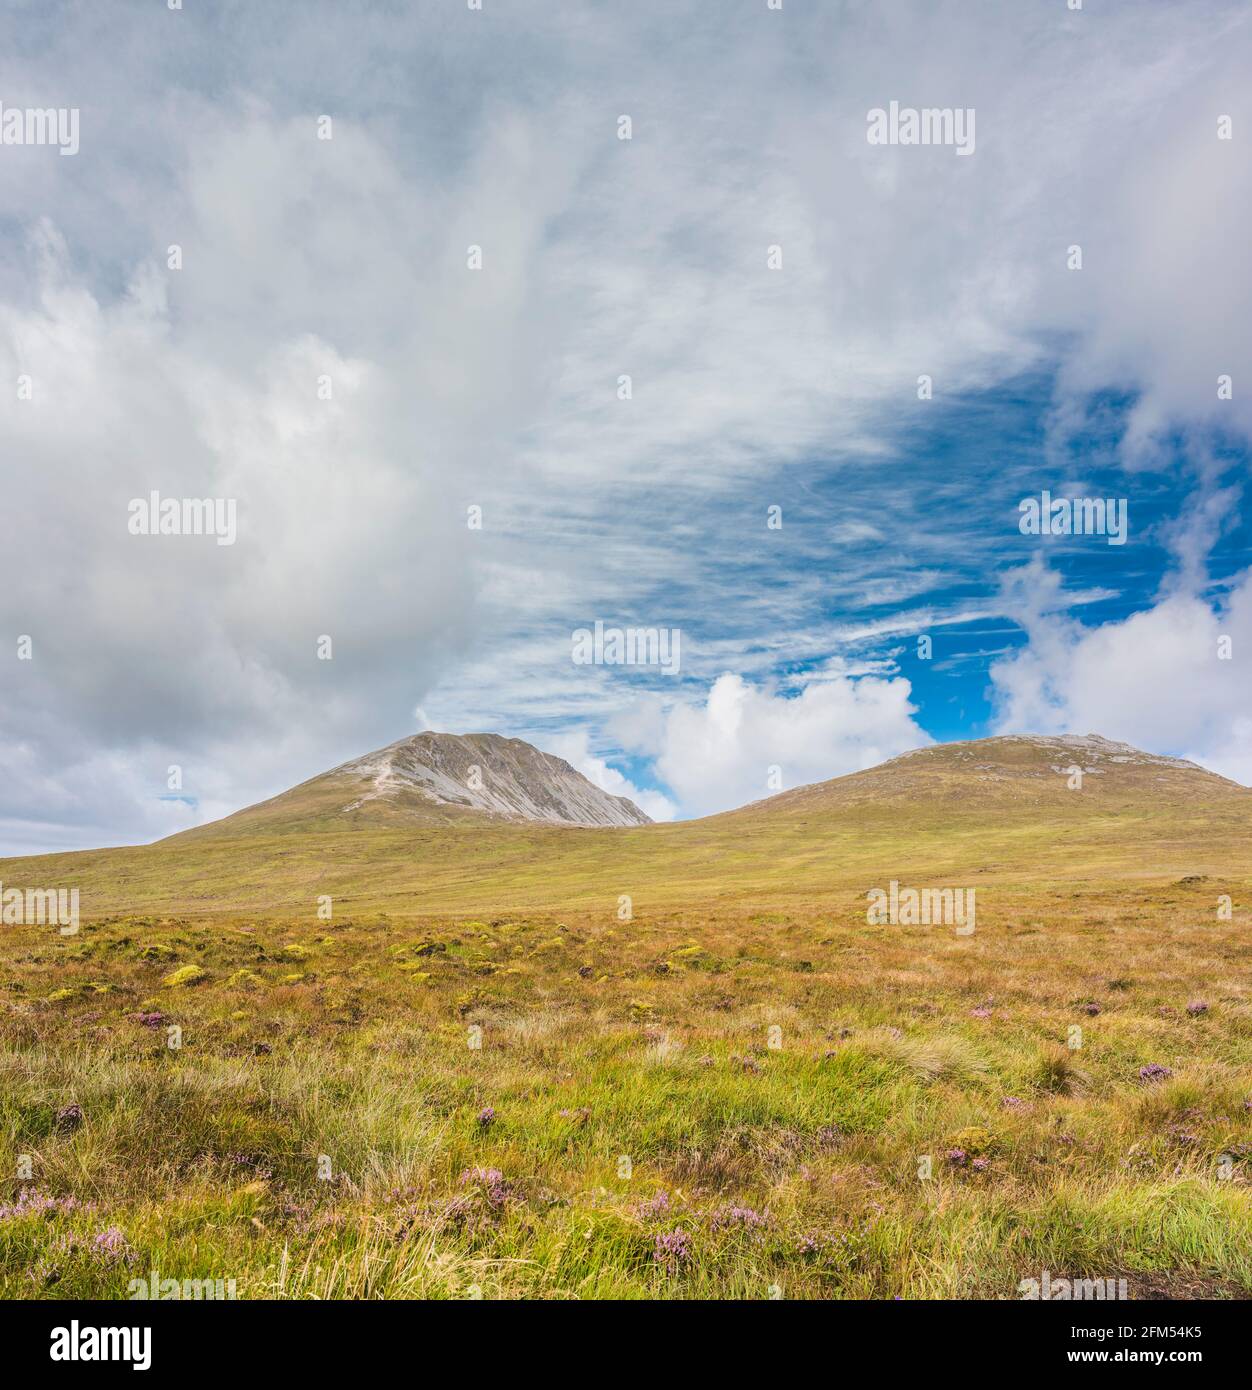 The western end of Muckish Mountain (An Mhucais), part of the Derryveagh Mountain range, Barnanageeha, County Donegal, Ireland Stock Photo